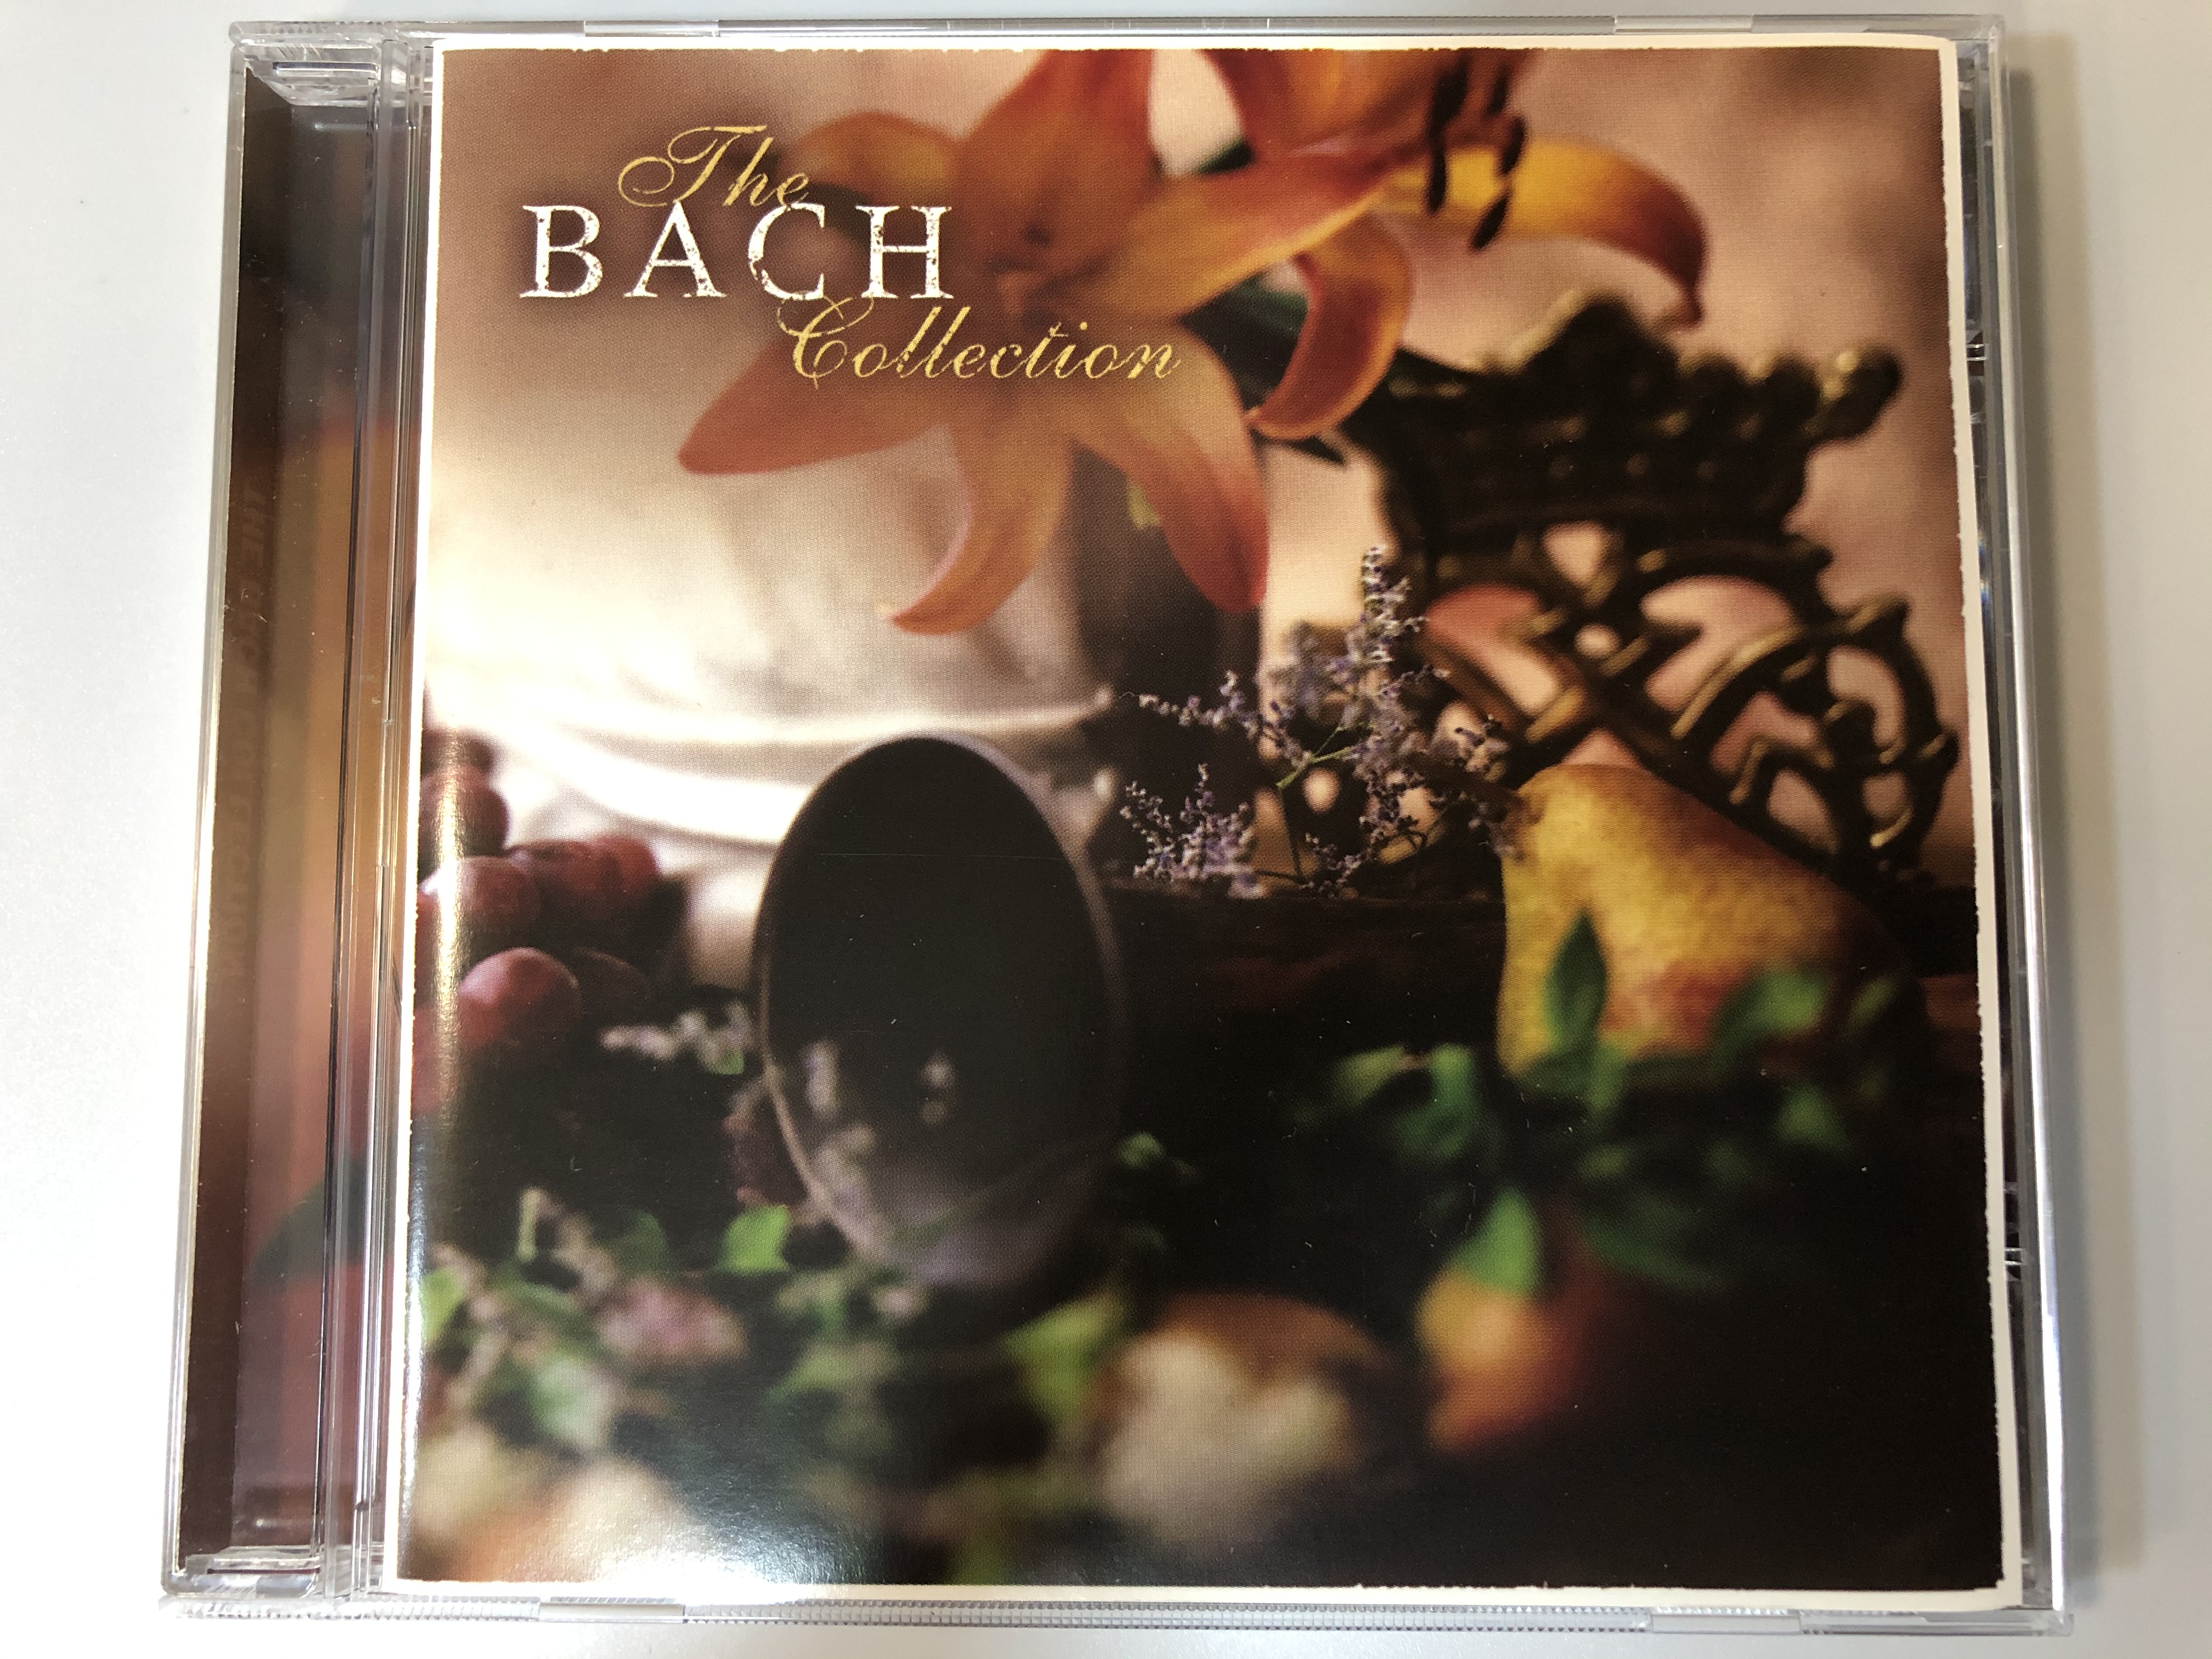 the-bach-collection-sony-classical-audio-cd-2006-82876852412-1-.jpg